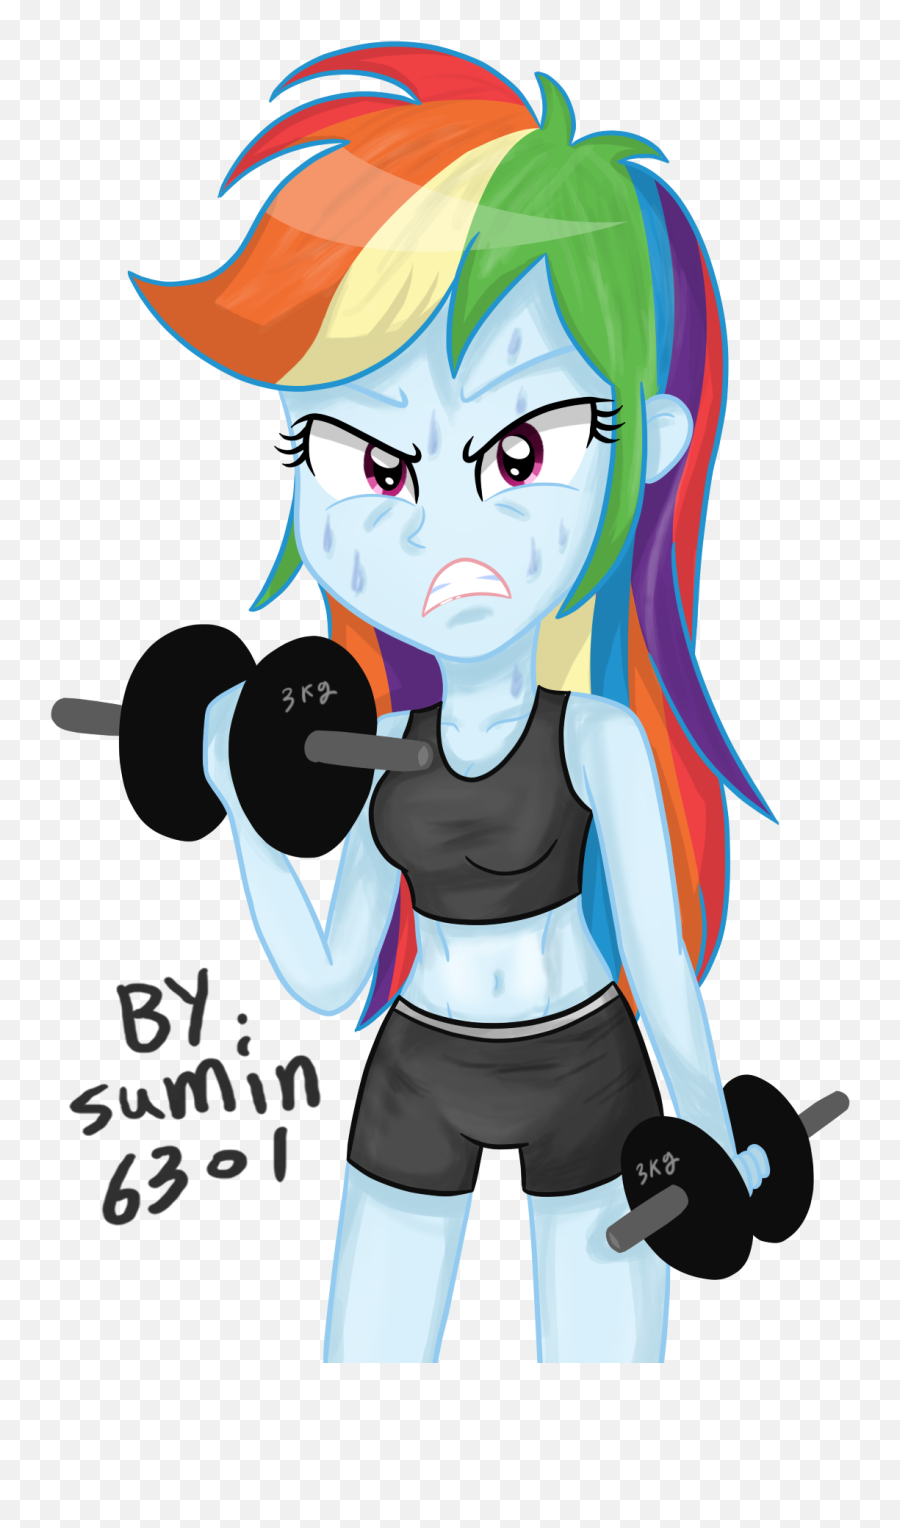 Png By Sumin6301 - Rainbow Dash Working Out 1172x1855 Gambar Rainbow Dash Equestria Girl Emoji,Working Out Clipart